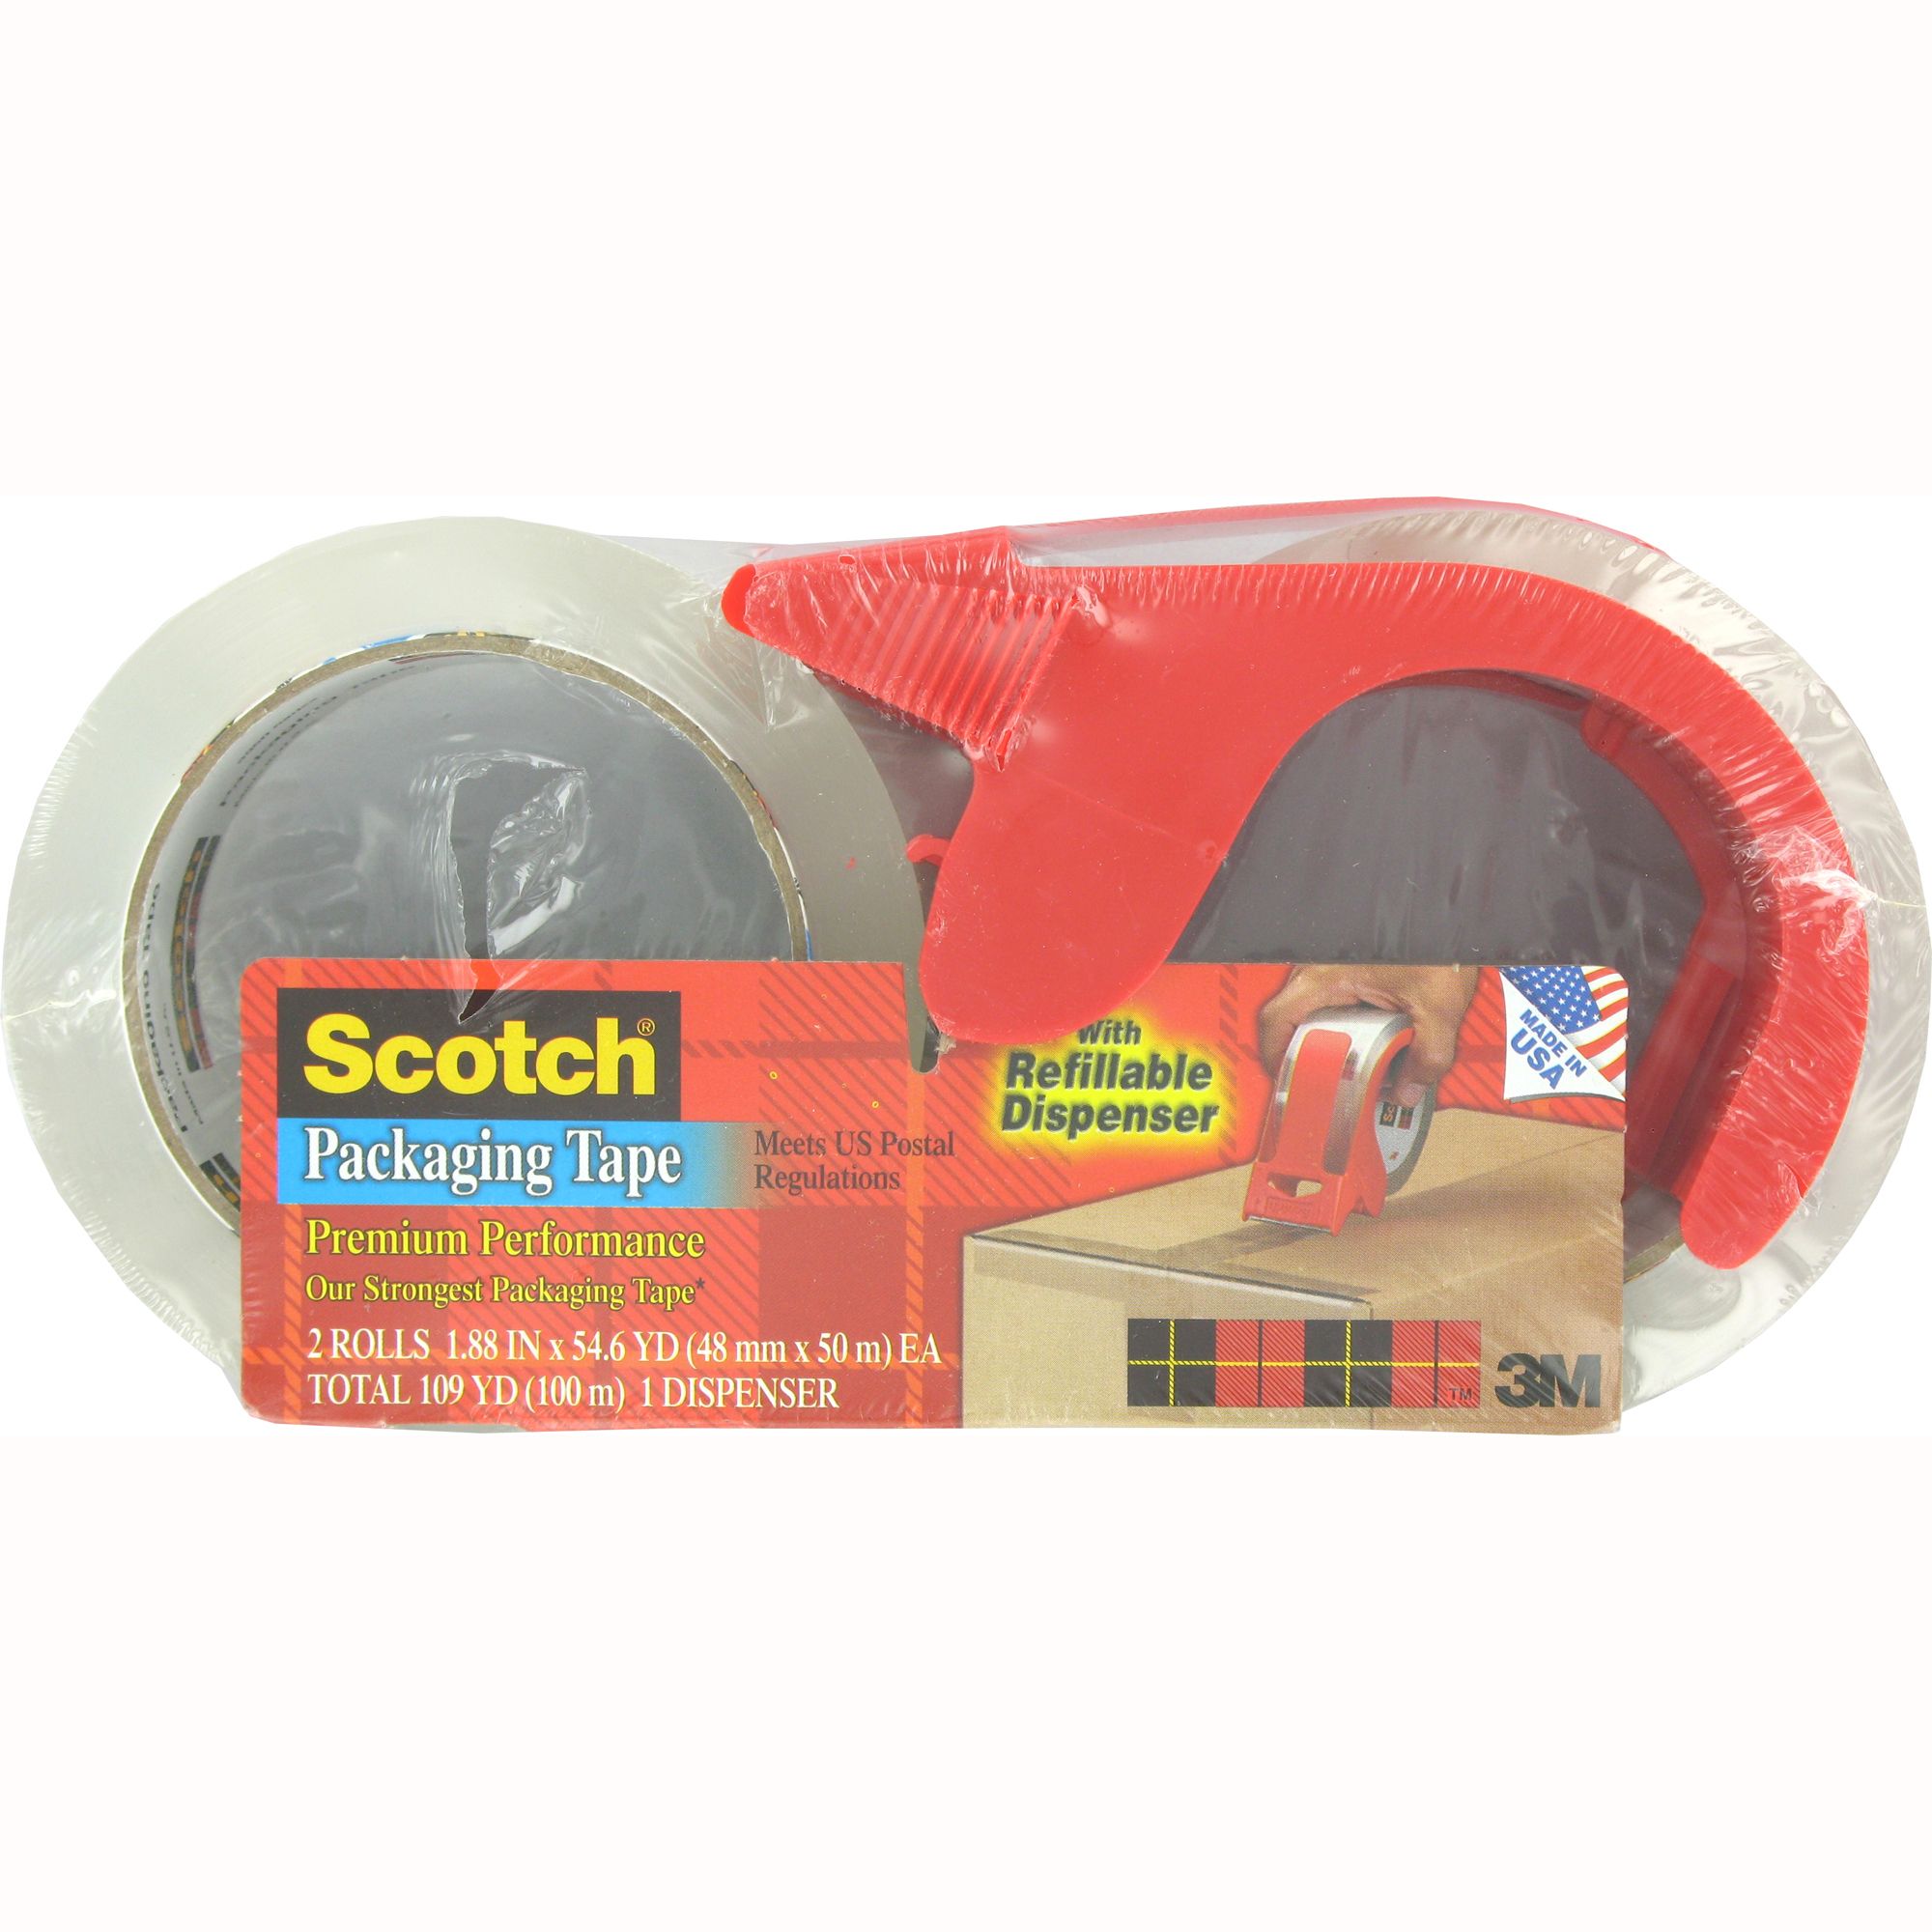 Scotch 3850-2-1RD Packaging Tape With Reuseable Dispenser 1.88 in x 54.6 yd 2 Rolls And 2 Dispenser